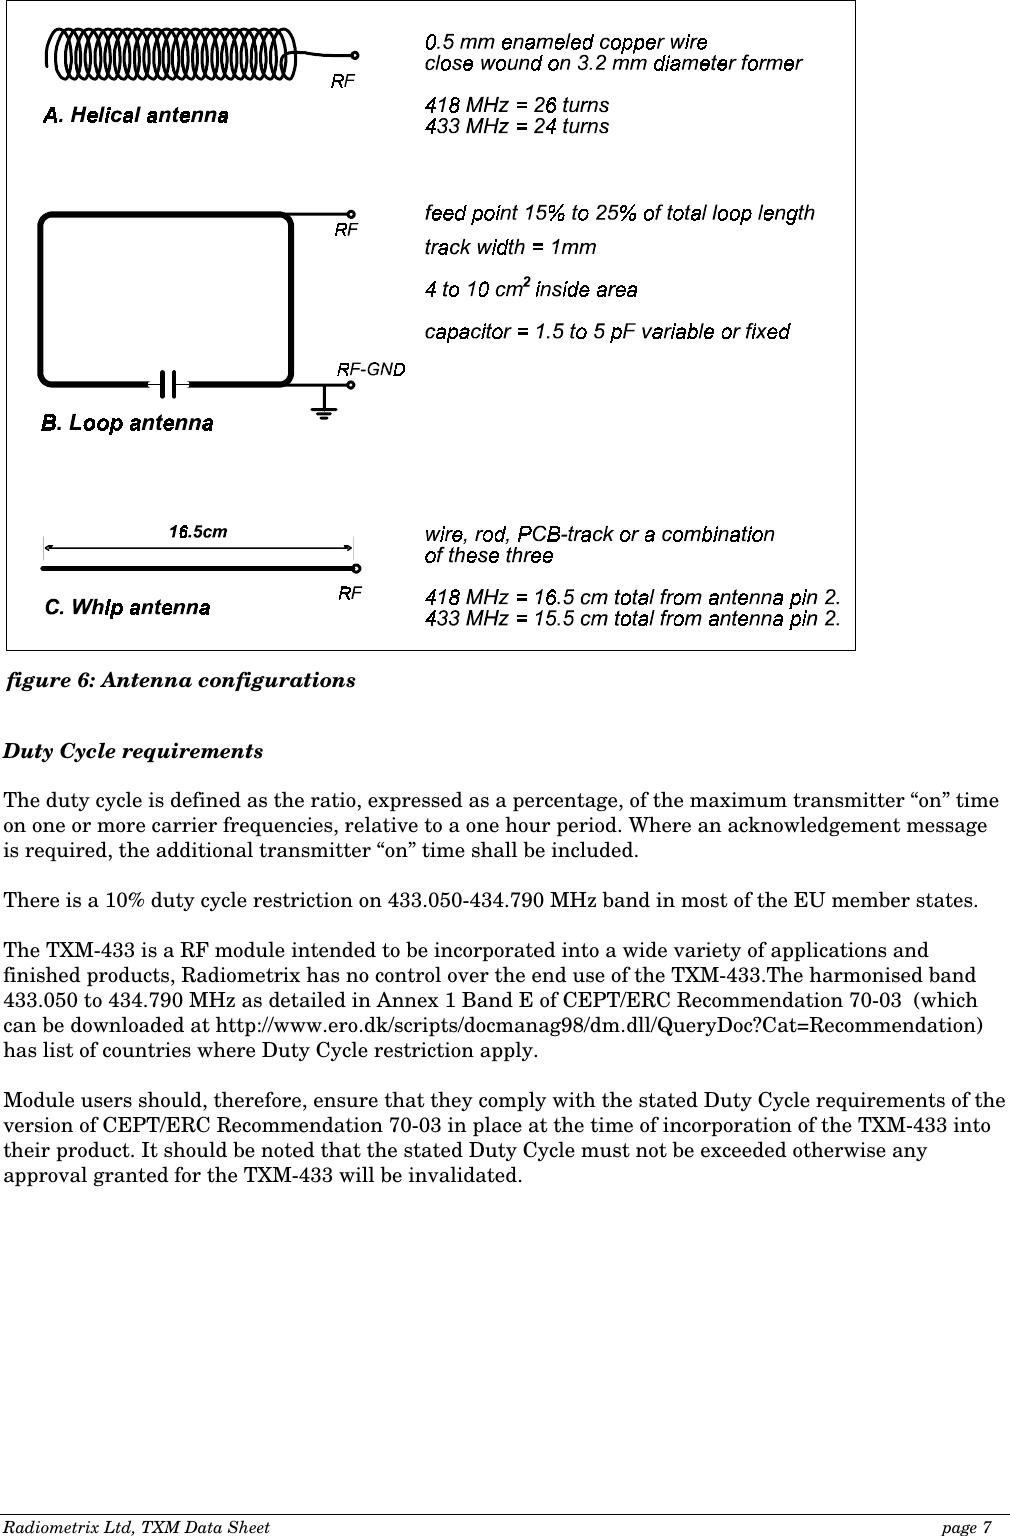 Radiometrix Ltd, TXM Data Sheet                                                                                              page 7                            Duty Cycle requirements  The duty cycle is defined as the ratio, expressed as a percentage, of the maximum transmitter “on” time on one or more carrier frequencies, relative to a one hour period. Where an acknowledgement message is required, the additional transmitter “on” time shall be included.   There is a 10% duty cycle restriction on 433.050-434.790 MHz band in most of the EU member states.  The TXM-433 is a RF module intended to be incorporated into a wide variety of applications and finished products, Radiometrix has no control over the end use of the TXM-433.The harmonised band 433.050 to 434.790 MHz as detailed in Annex 1 Band E of CEPT/ERC Recommendation 70-03  (which can be downloaded at http://www.ero.dk/scripts/docmanag98/dm.dll/QueryDoc?Cat=Recommendation) has list of countries where Duty Cycle restriction apply.   Module users should, therefore, ensure that they comply with the stated Duty Cycle requirements of the version of CEPT/ERC Recommendation 70-03 in place at the time of incorporation of the TXM-433 into their product. It should be noted that the stated Duty Cycle must not be exceeded otherwise any approval granted for the TXM-433 will be invalidated. figure 6: Antenna configurations 